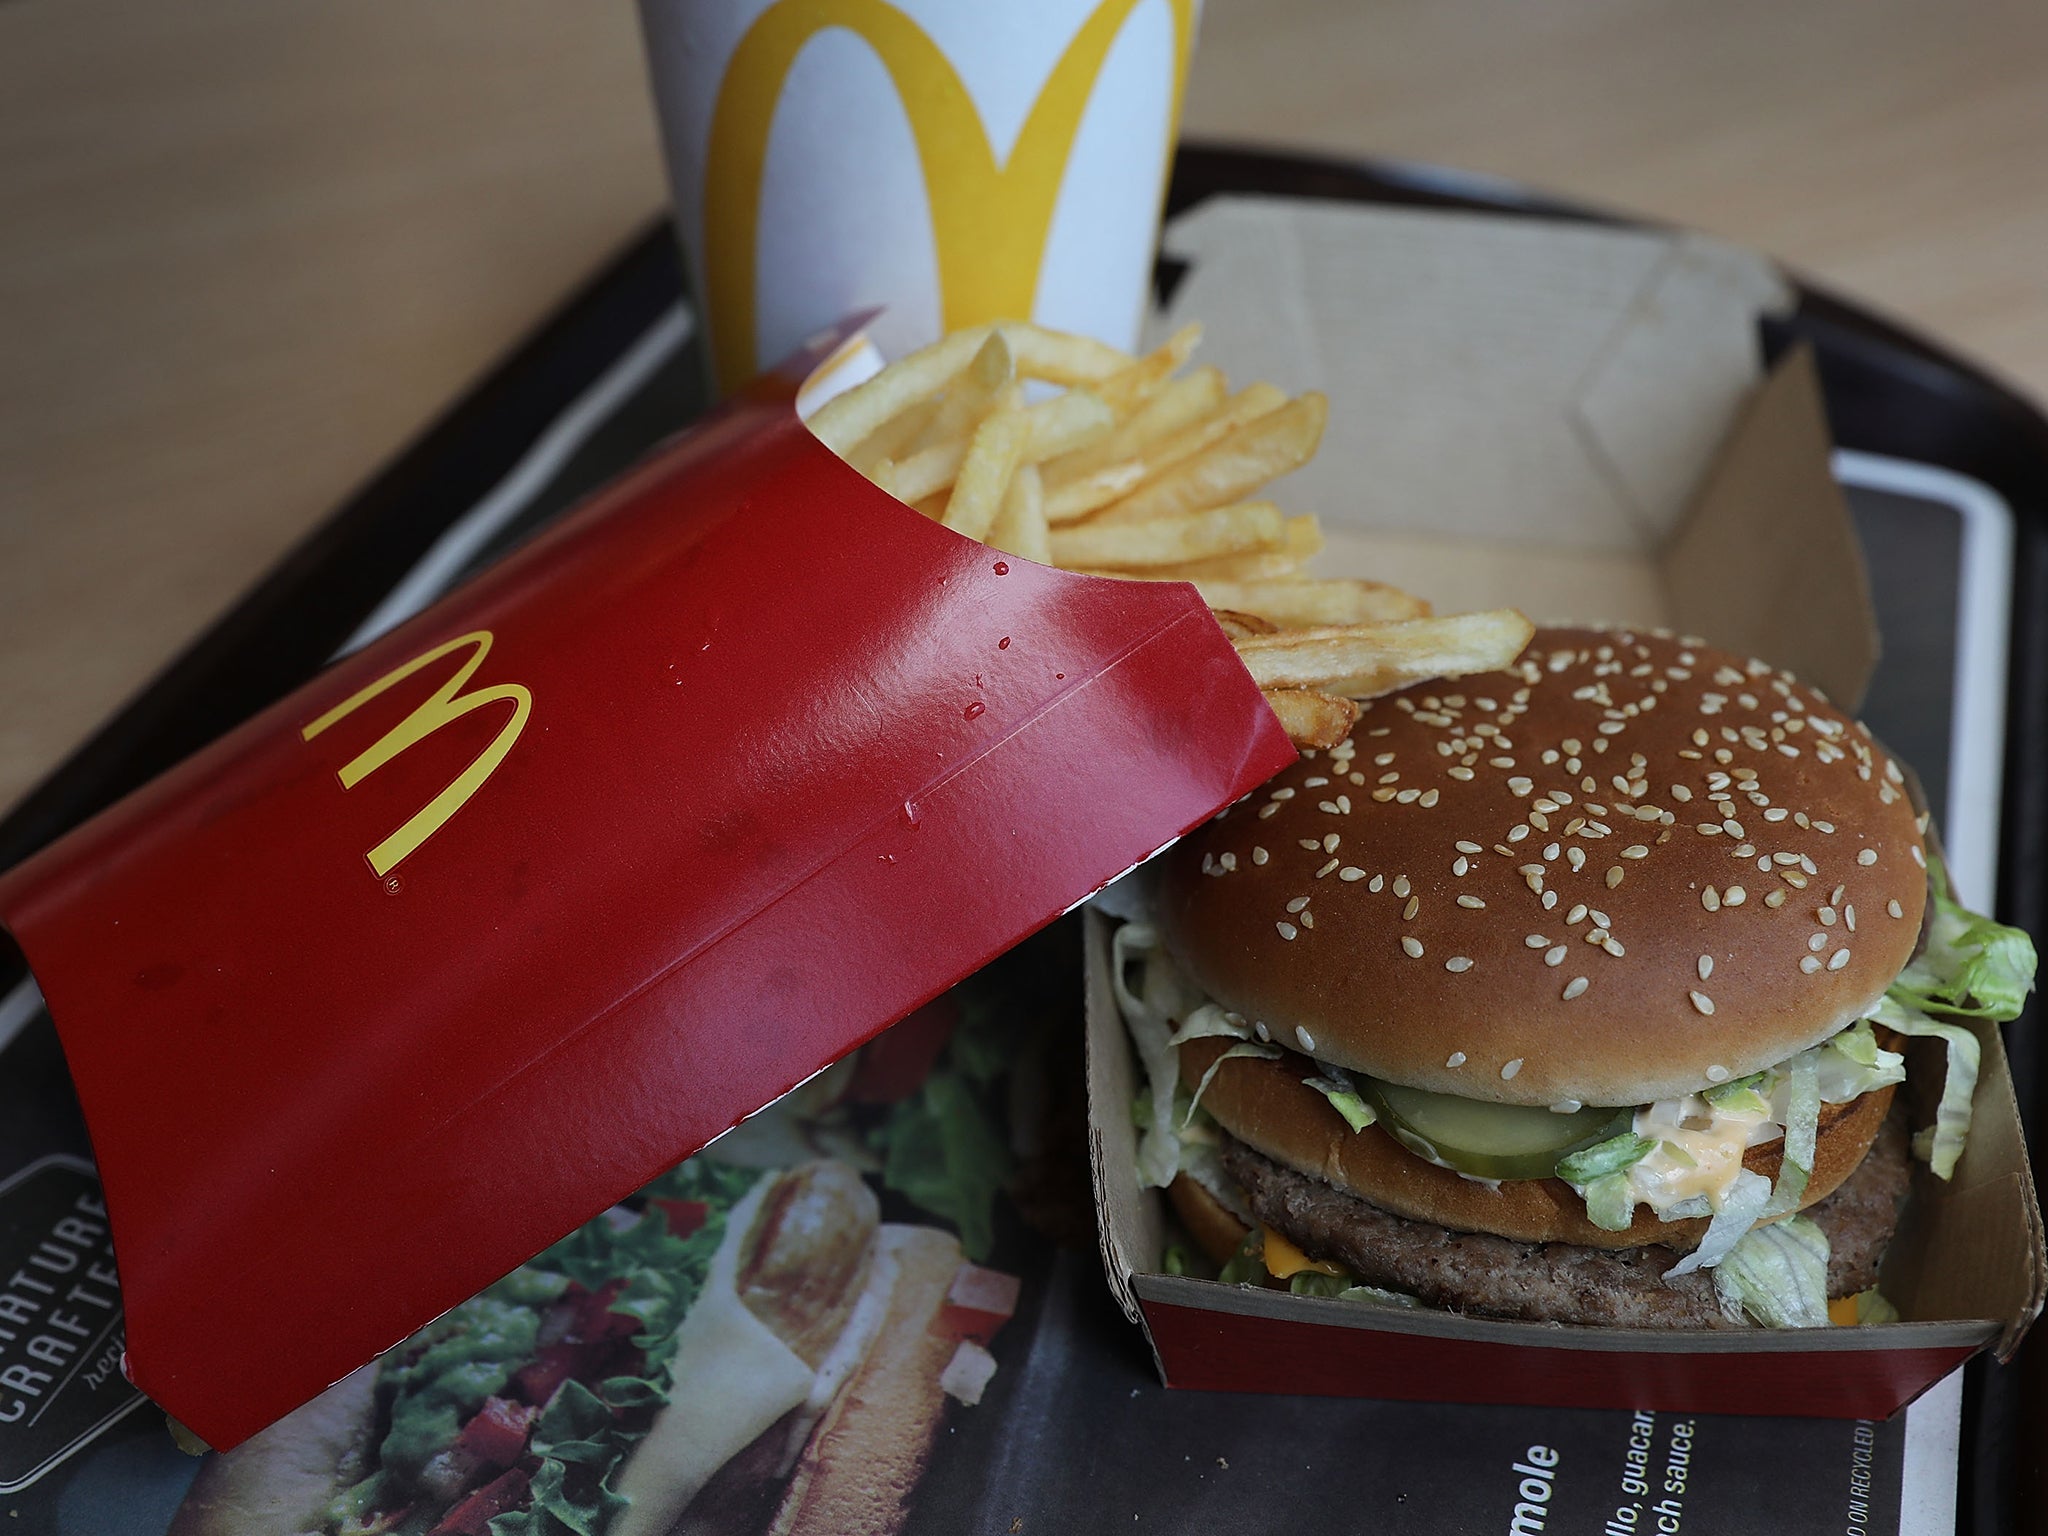 Lawrence O’Driscoll-Faitaua, 43, ordered a Big Mac and 24 chicken nuggets from McDonalds